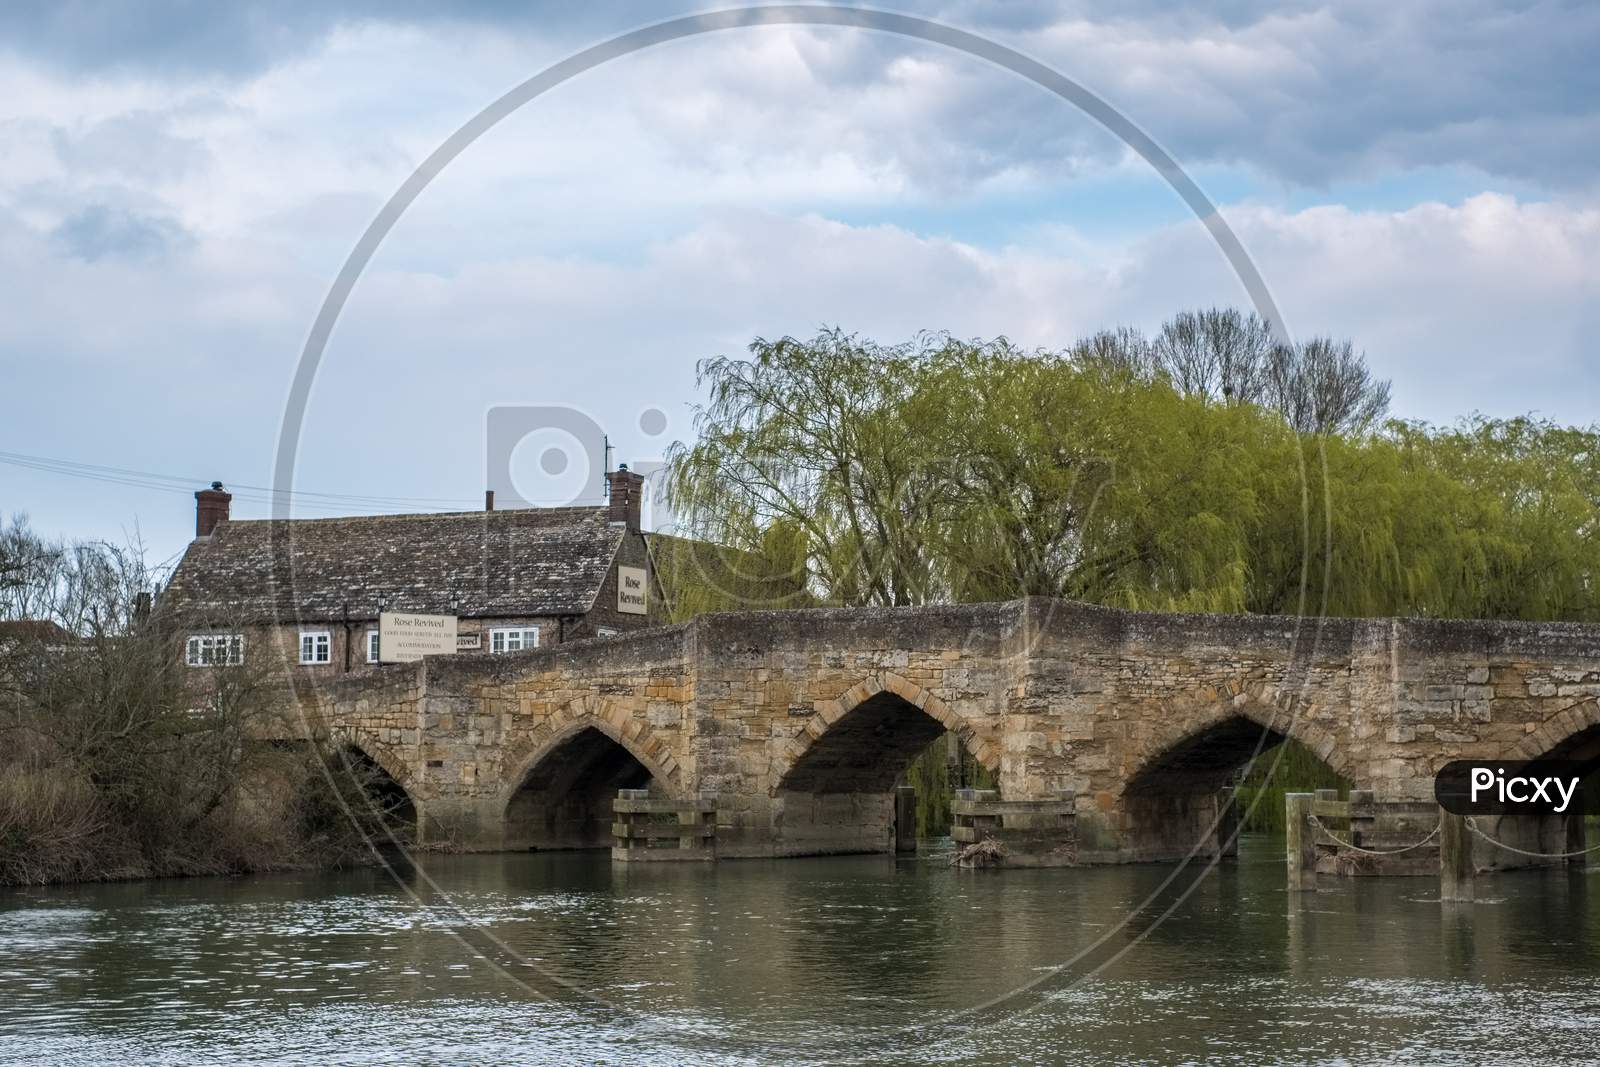 View Of The New Bridge Over The River Thames Between Abingdon And Witney